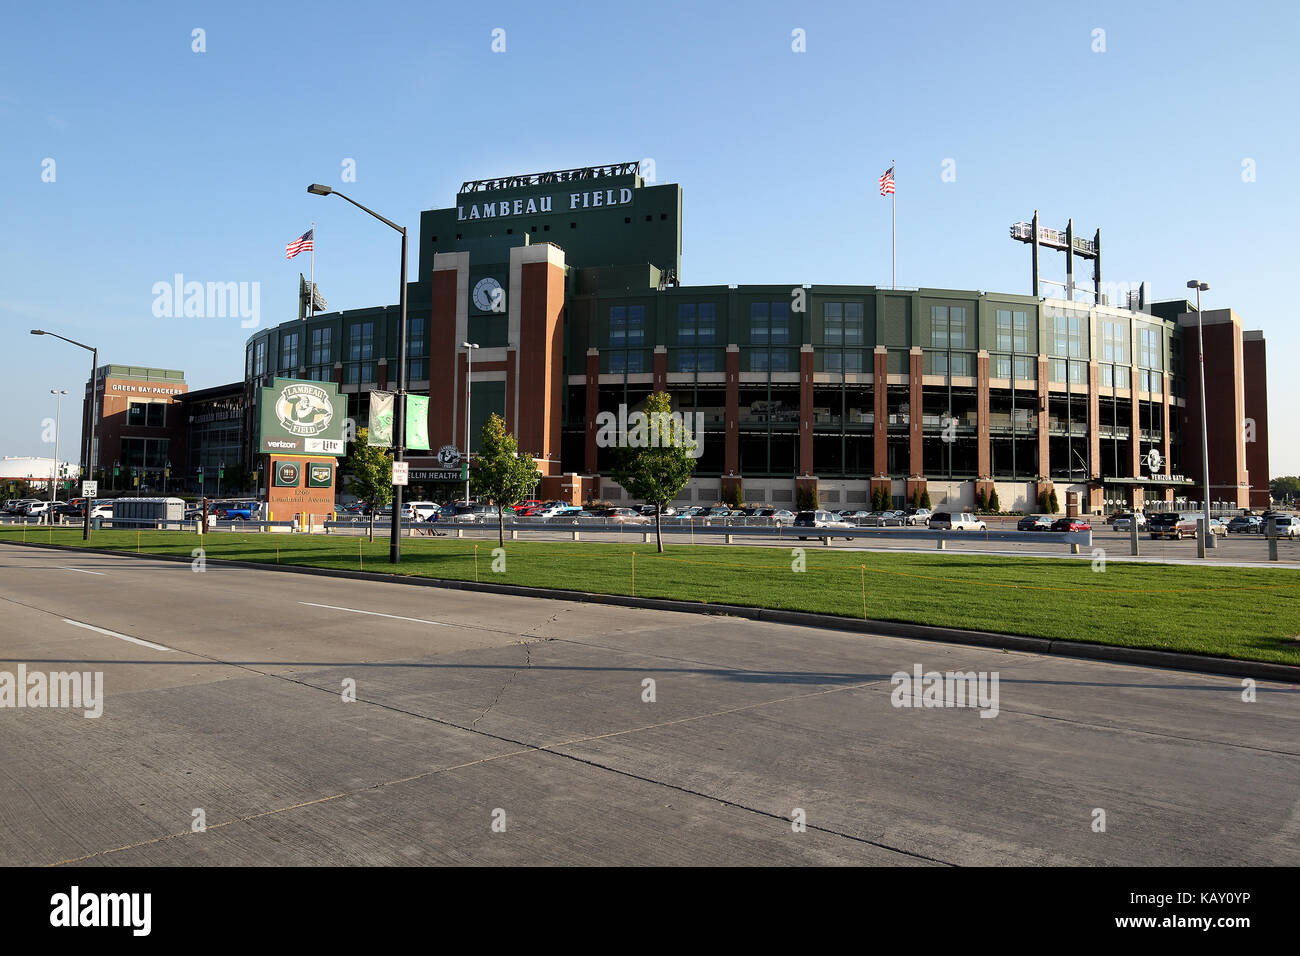 Green Bay, Wisconsin, Lambeau Field home of the NFL Green Bay Packers. Stock Photo